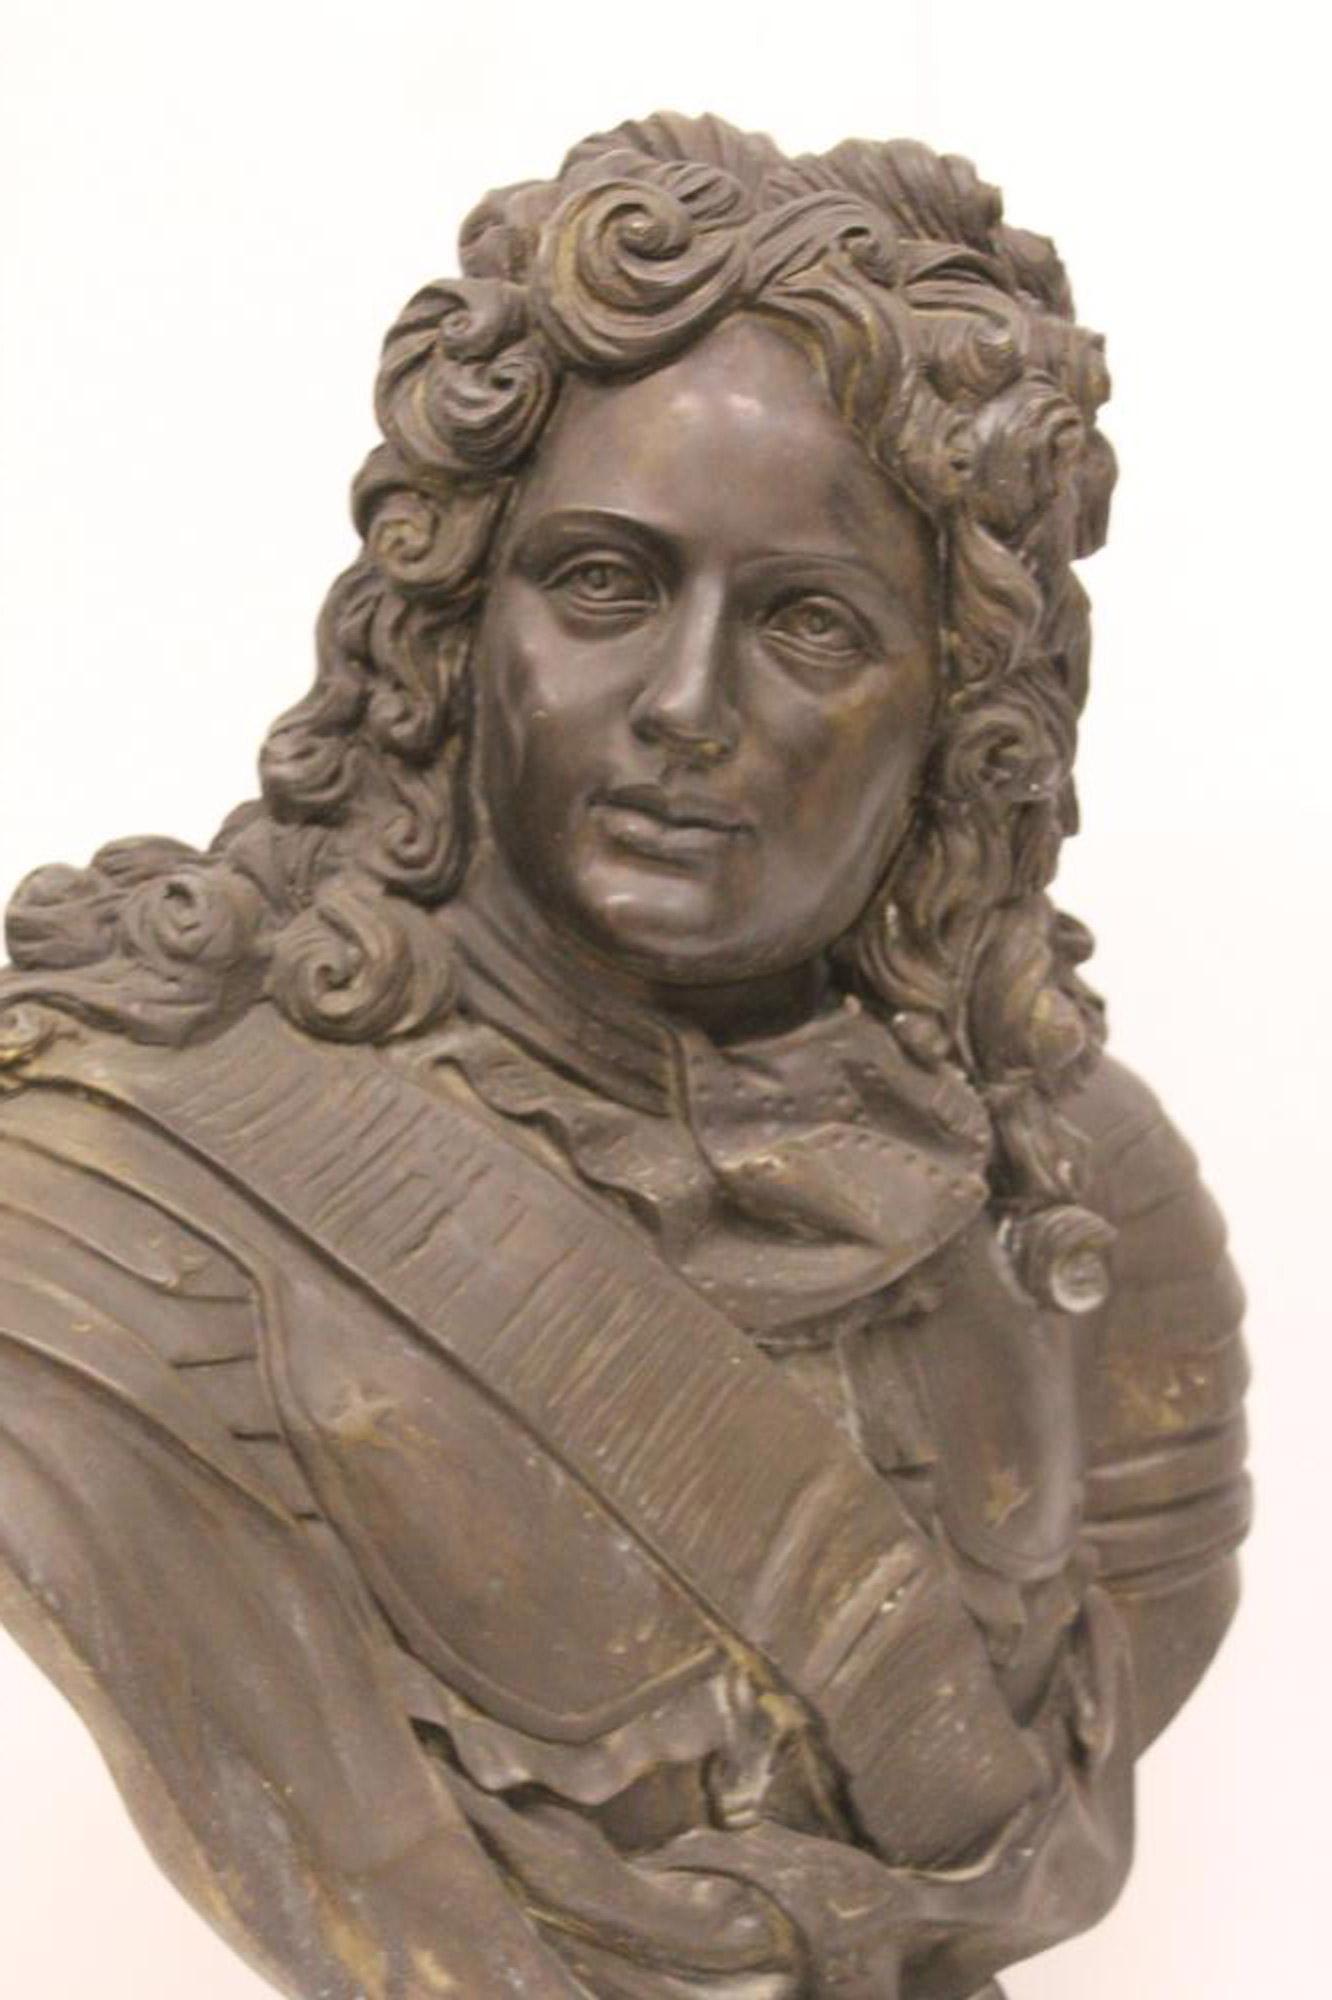 Description
Louis XIV, bronze sculpture. ADDITIONAL PHOTOS, INFORMATION OF THE LOT AND SHIPPING INFORMATION CAN BE REQUEST BY SENDING AN EMAIL.
Tags: Luigi XIV, scultura in bronzo. Luis XIV, escultura de bronce. Louis XIV, sculpture en bronze.